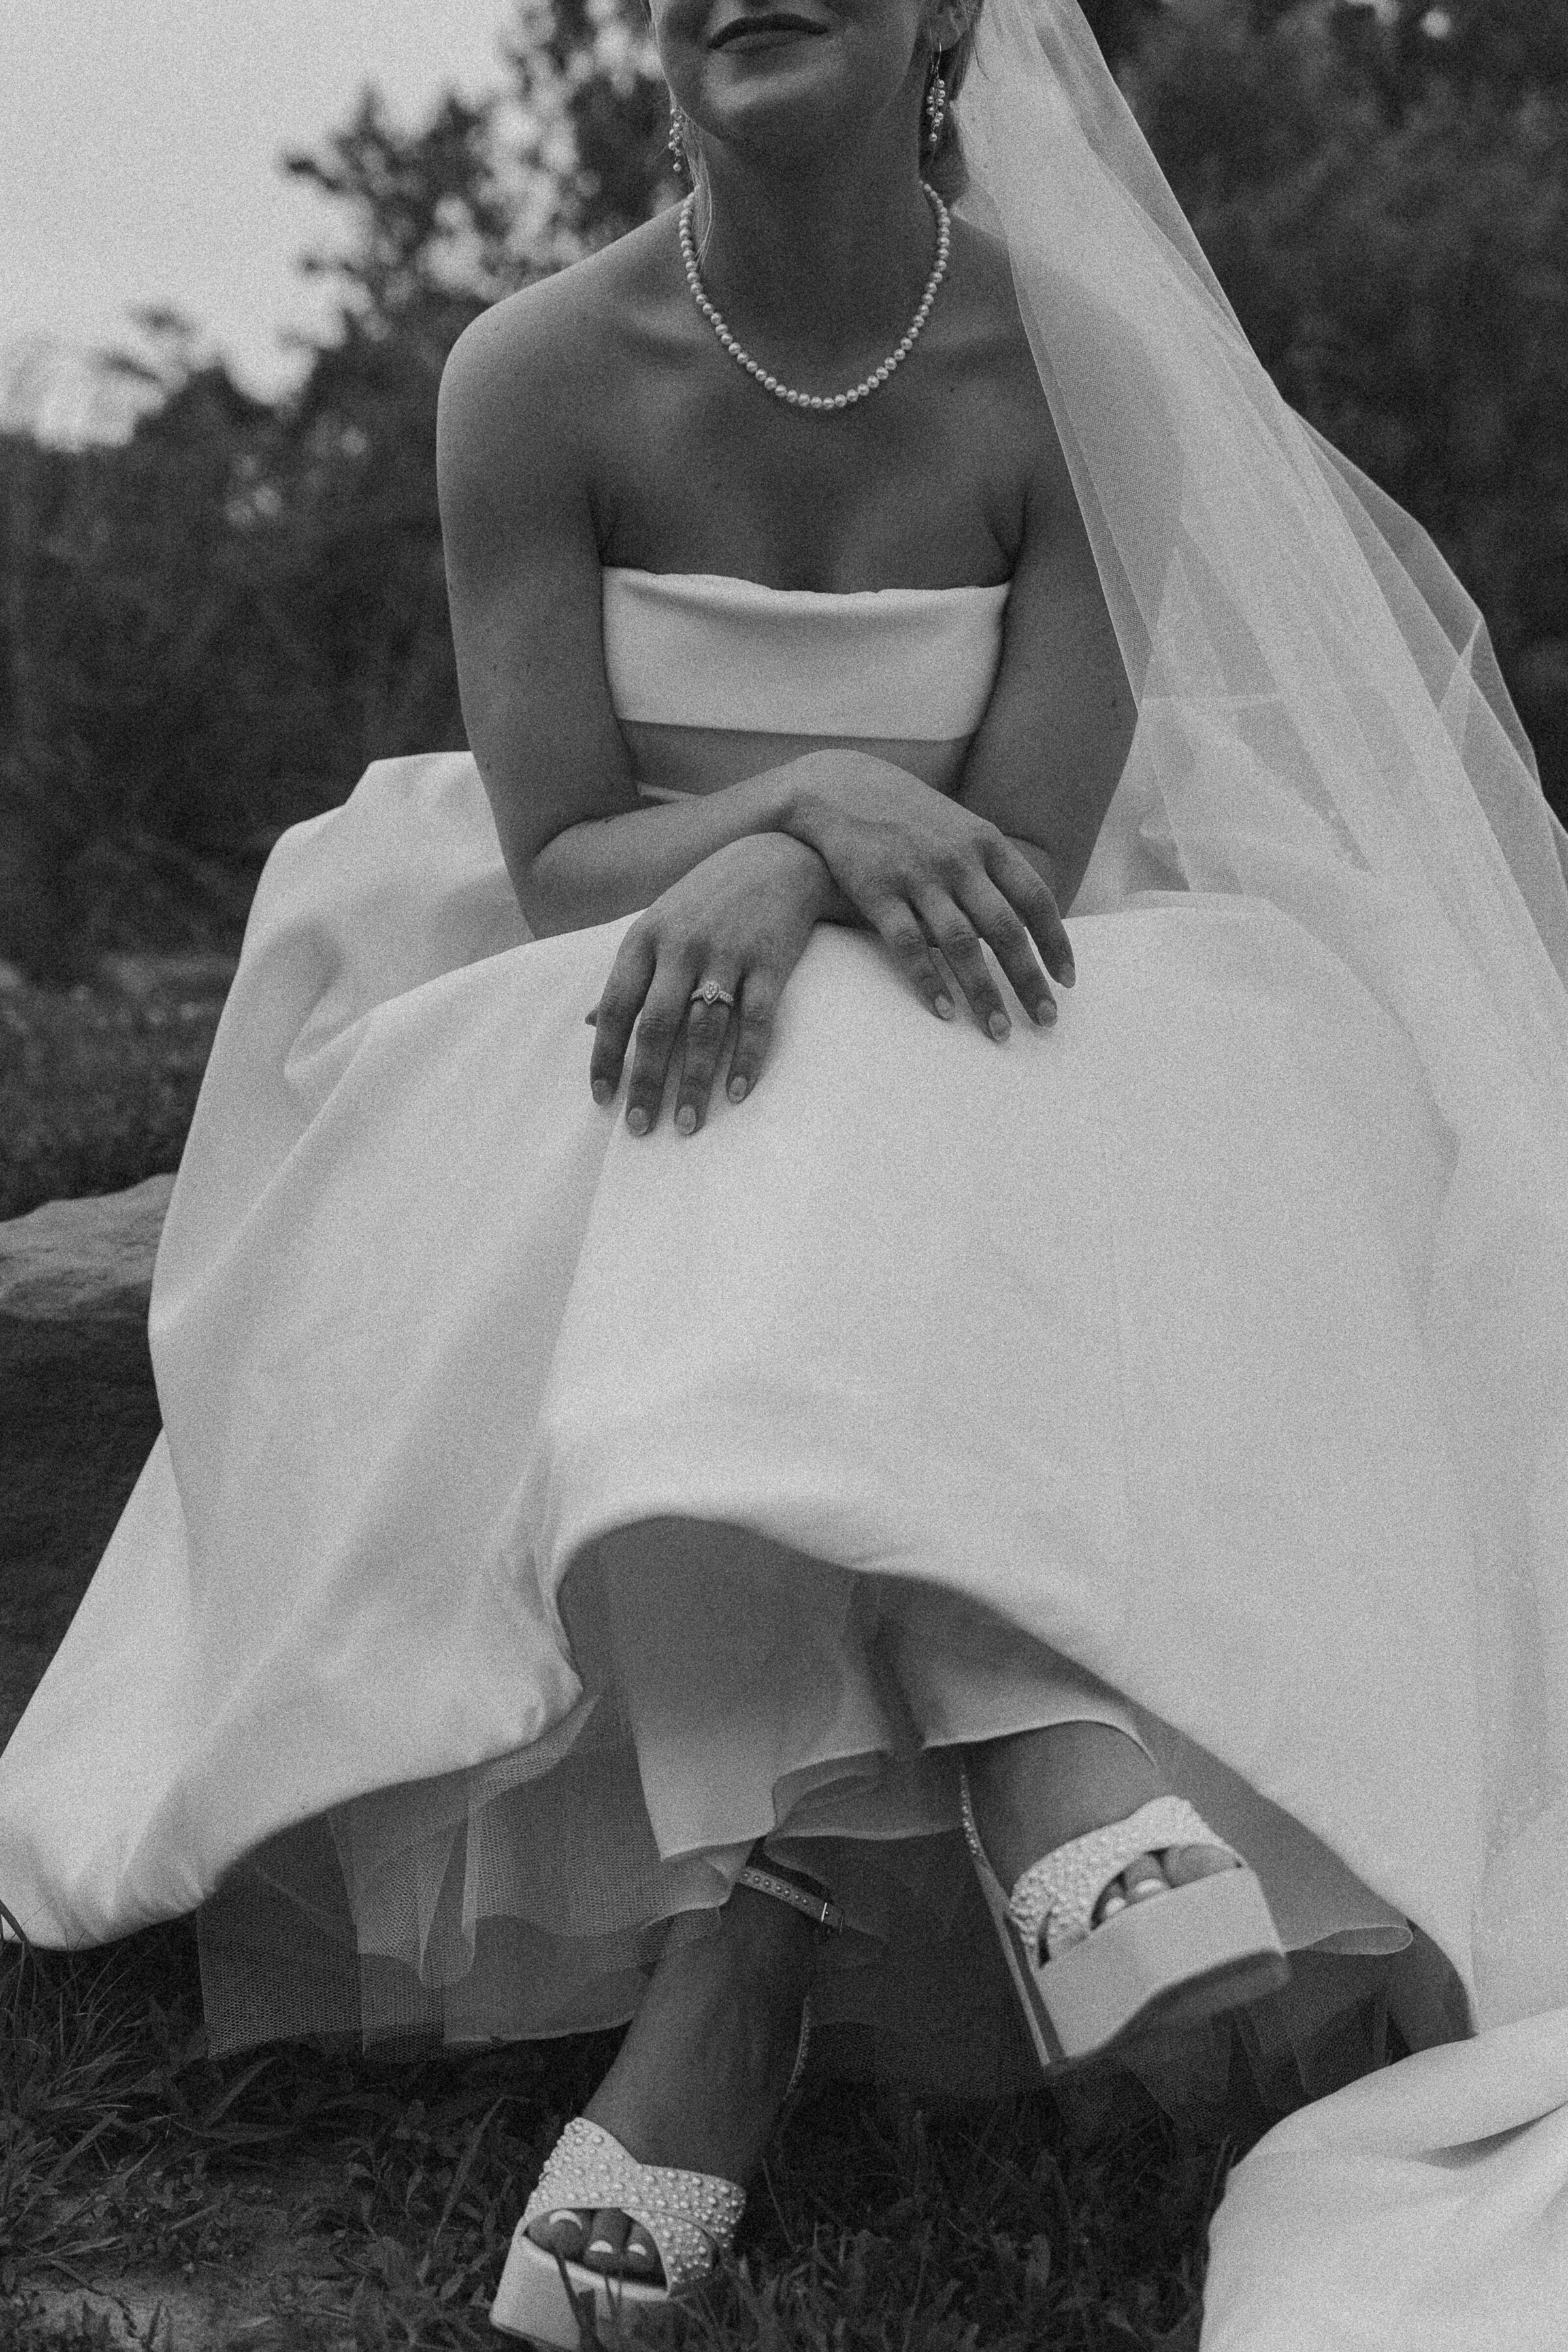 Seated bride showing sandals and veil.